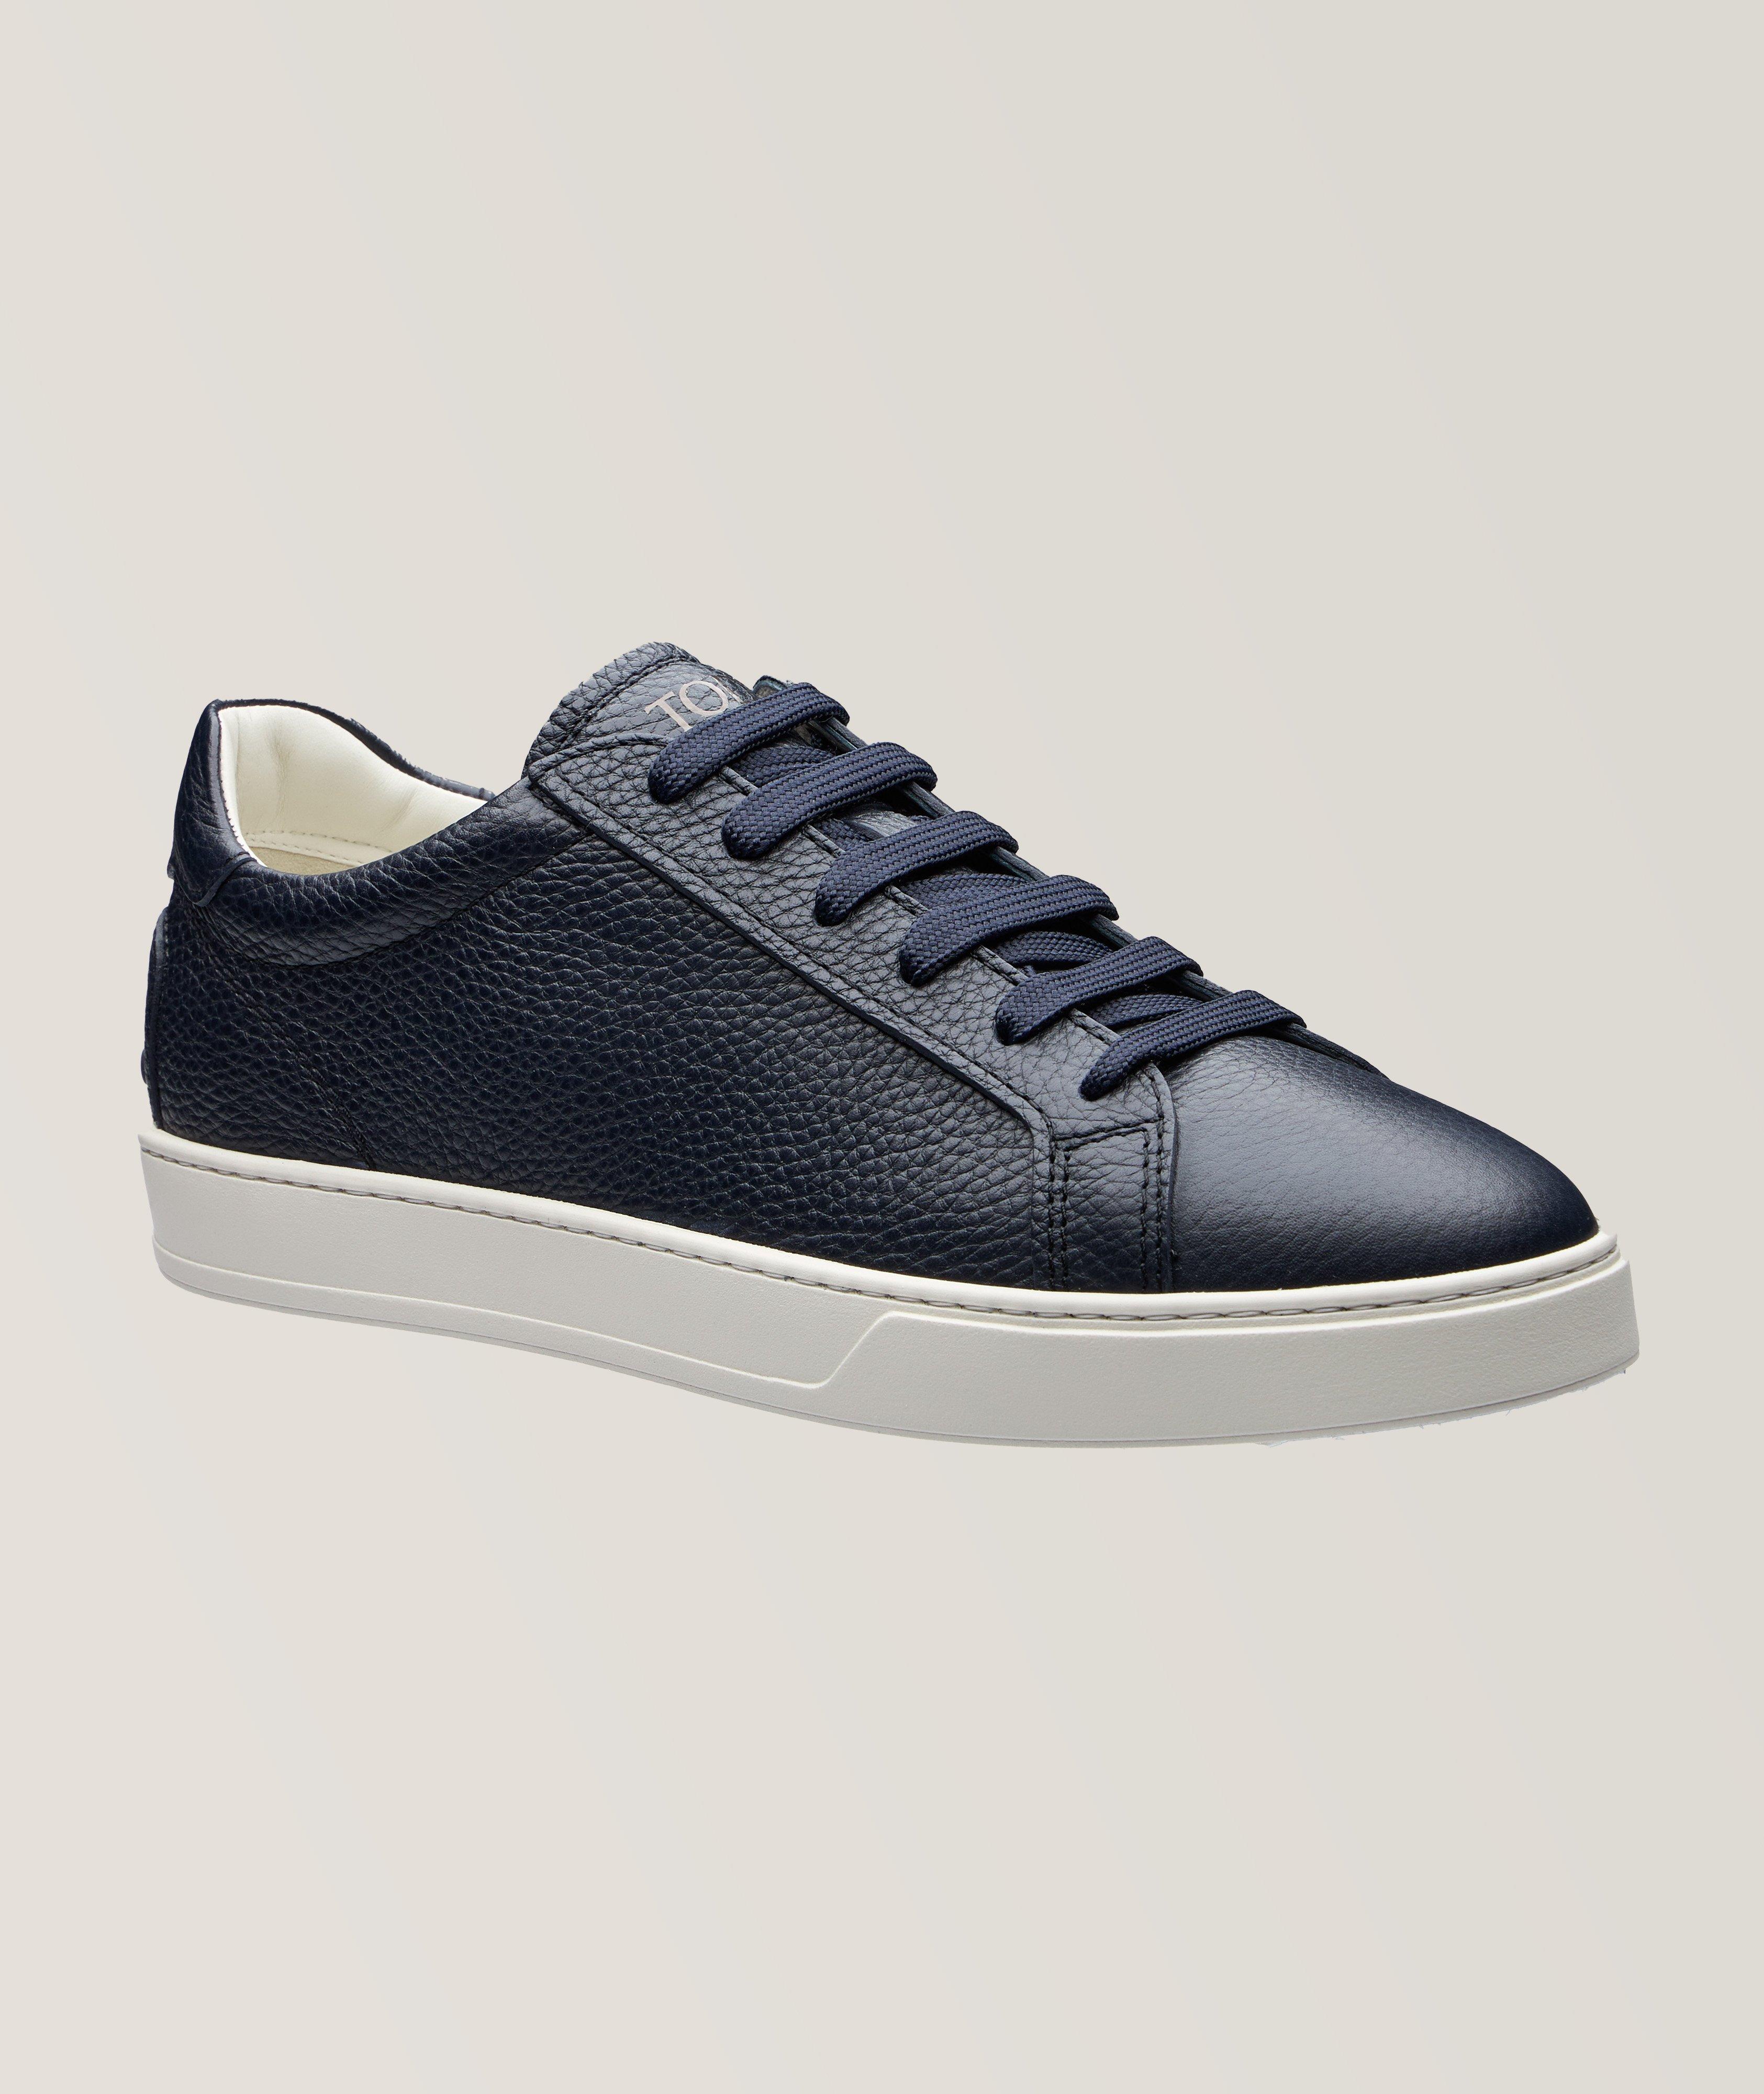 Low-Top Leather Sneaker image 0